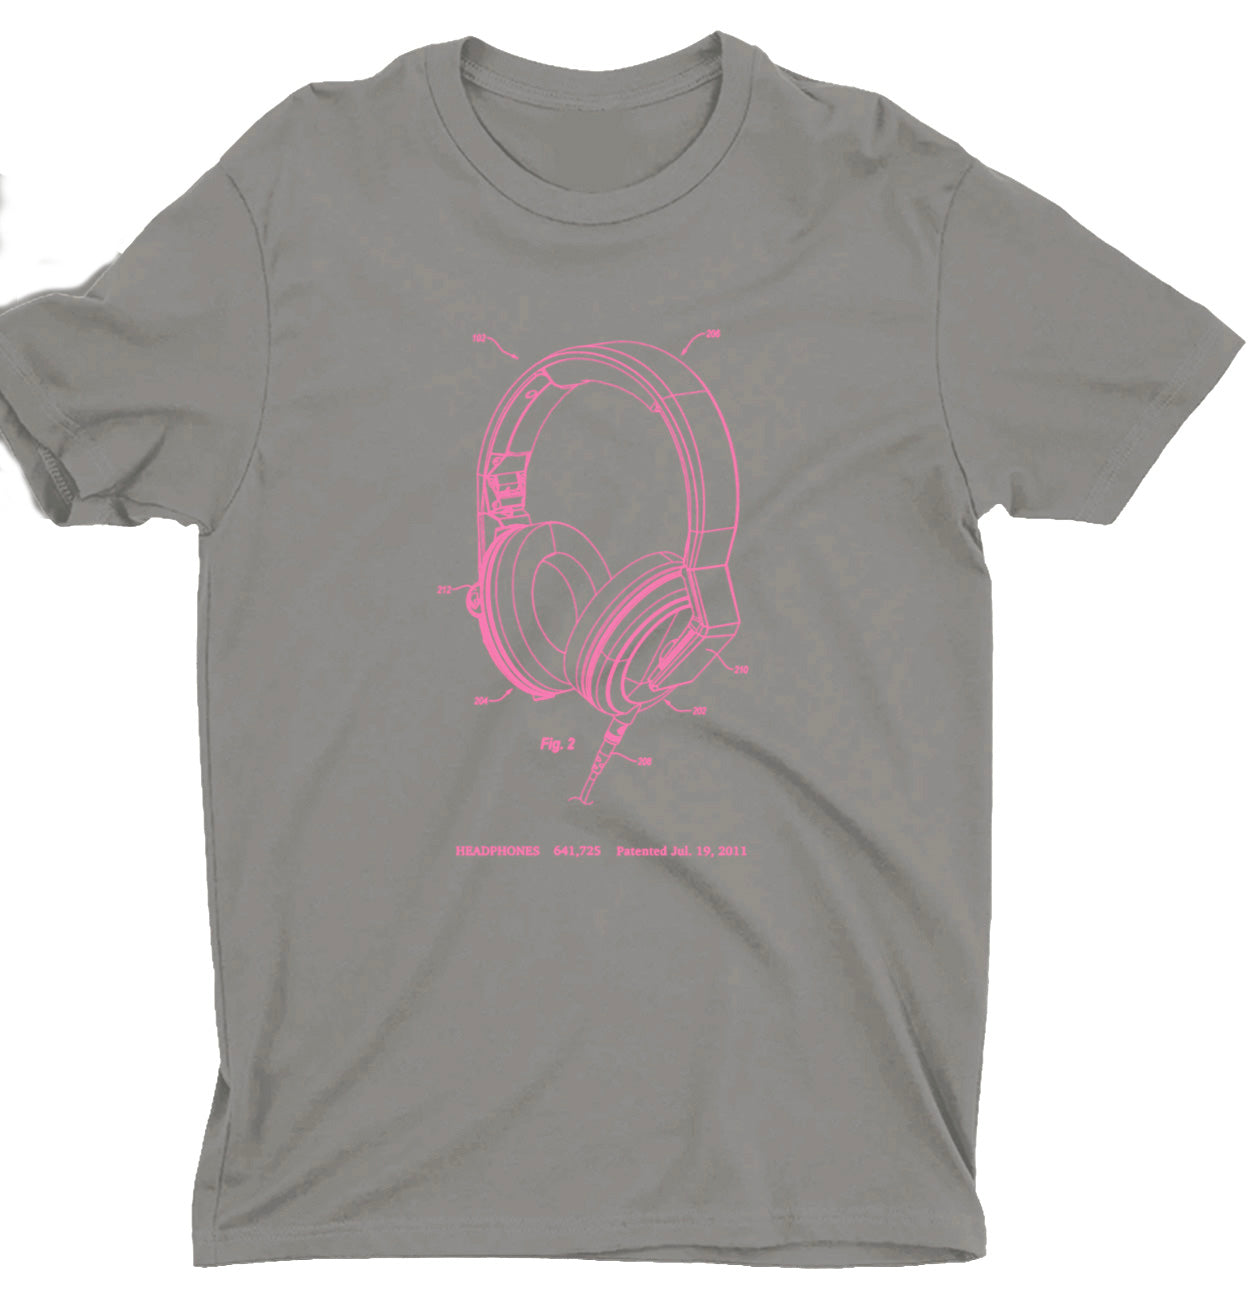 Headphones Patent T-shirt - Charcoal with Electric Pink Ink